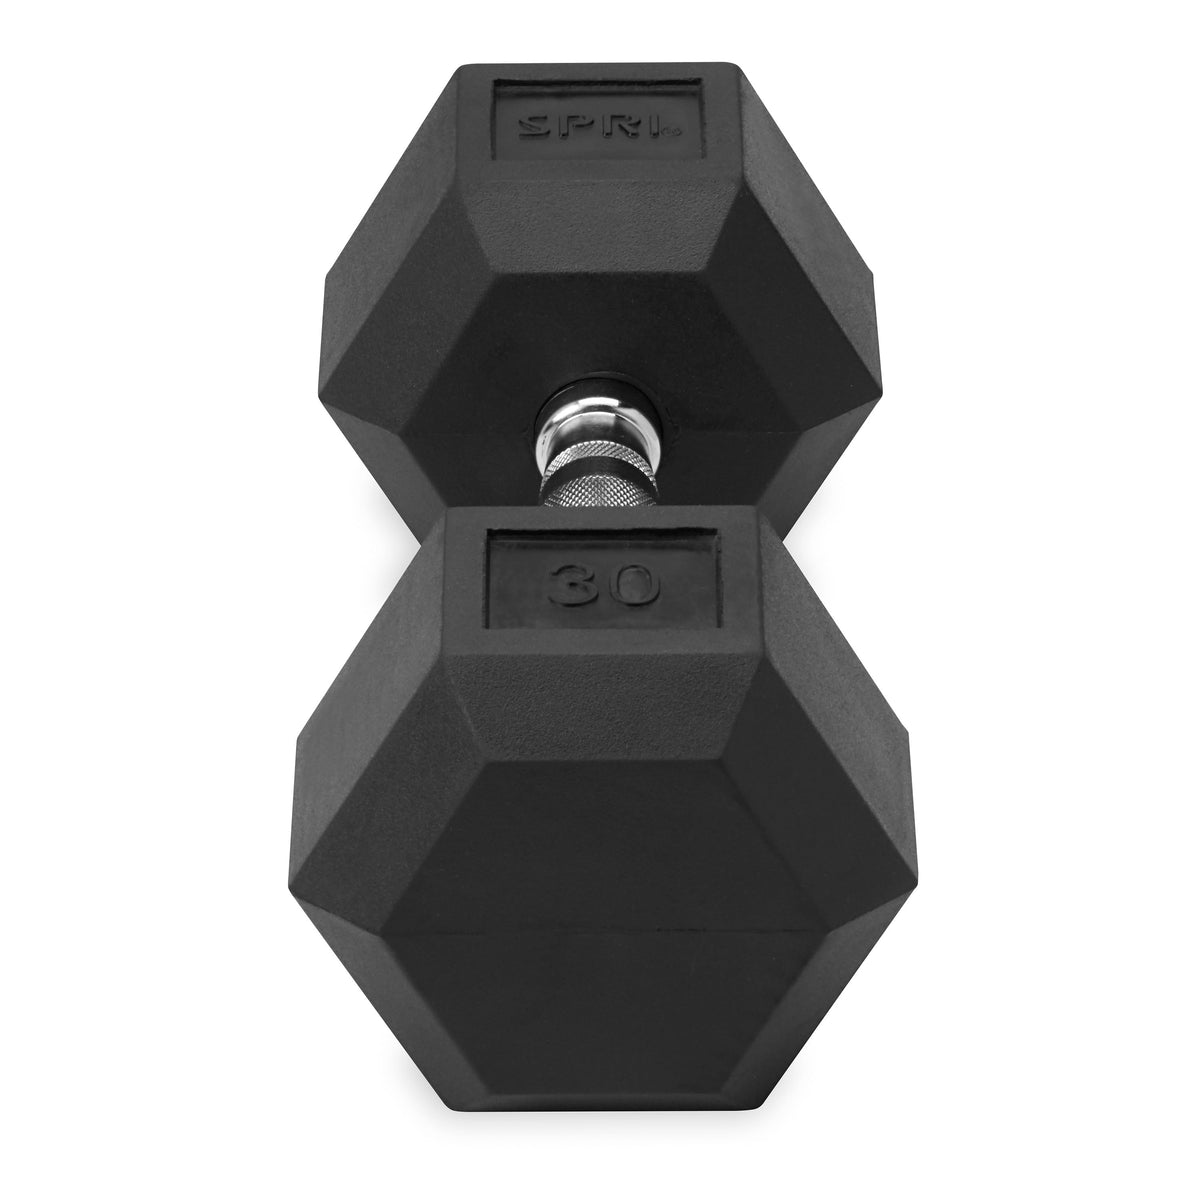 30lb six-sided single dumbbell front view